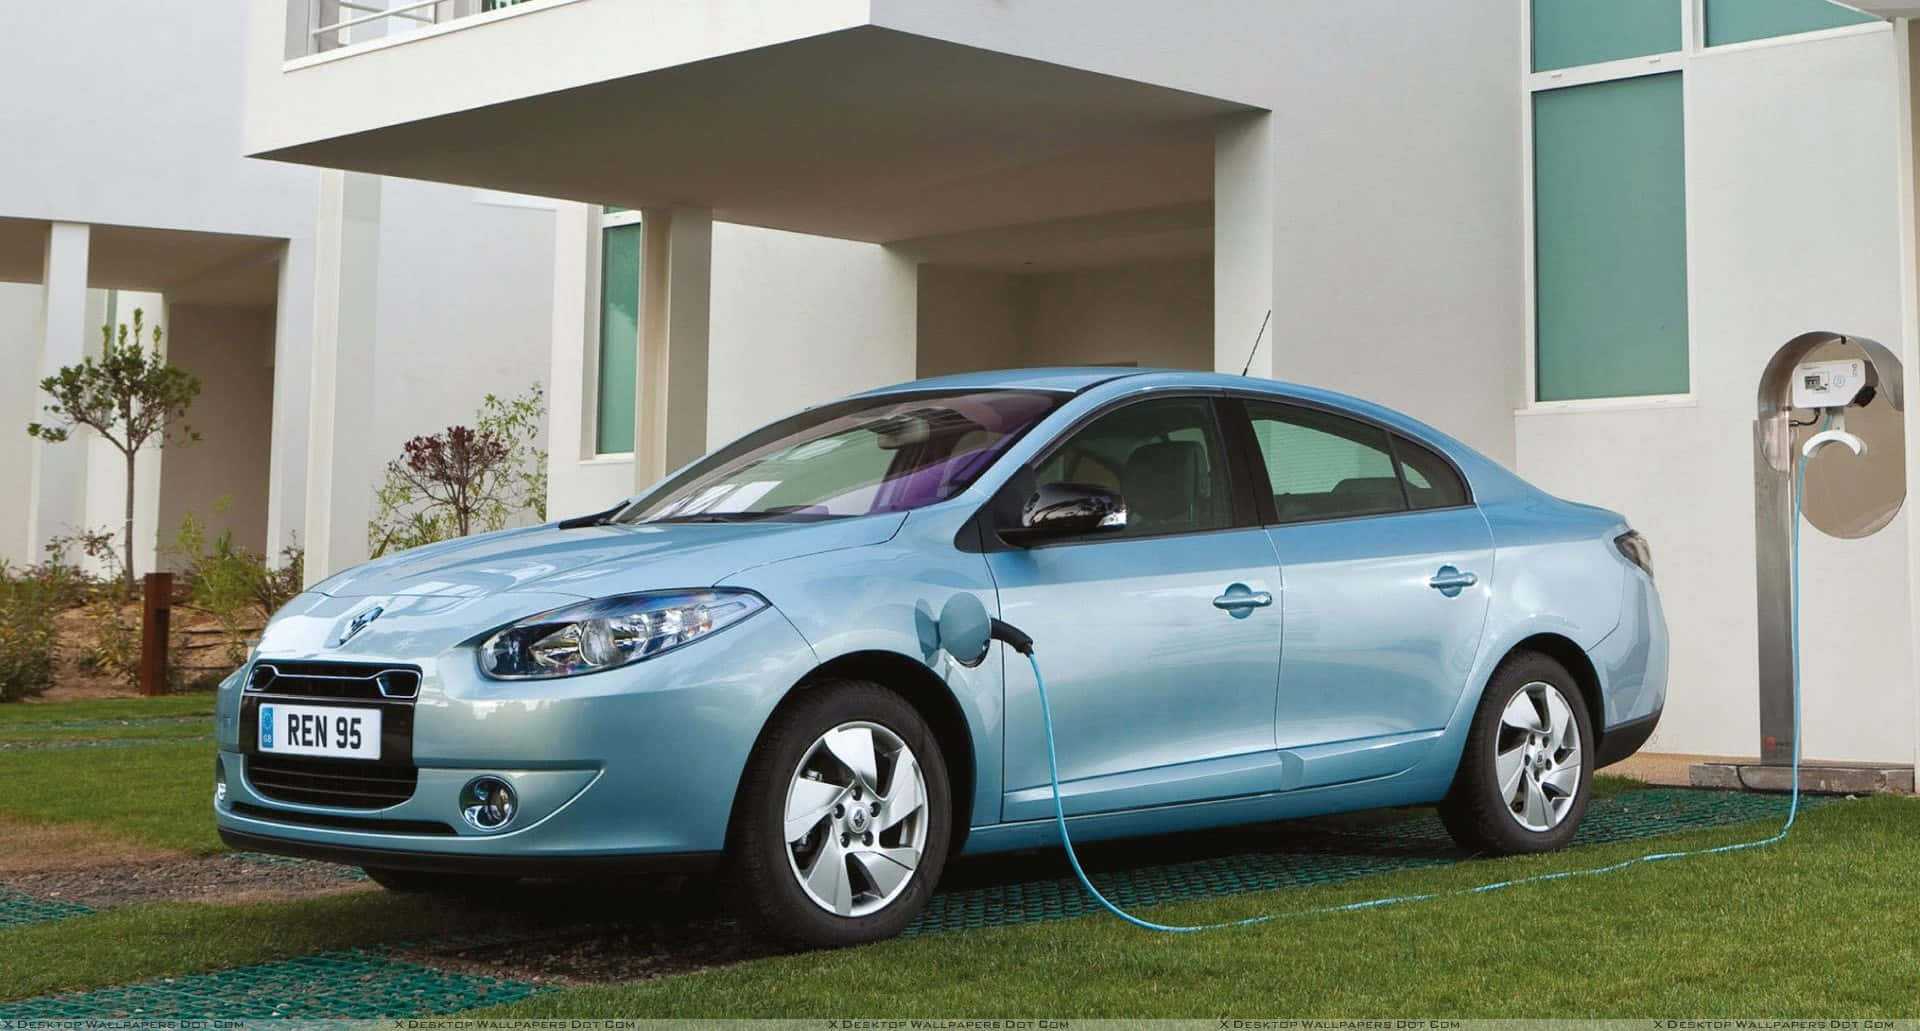 Caption: Sleek and Stylish Renault Fluence in Action Wallpaper